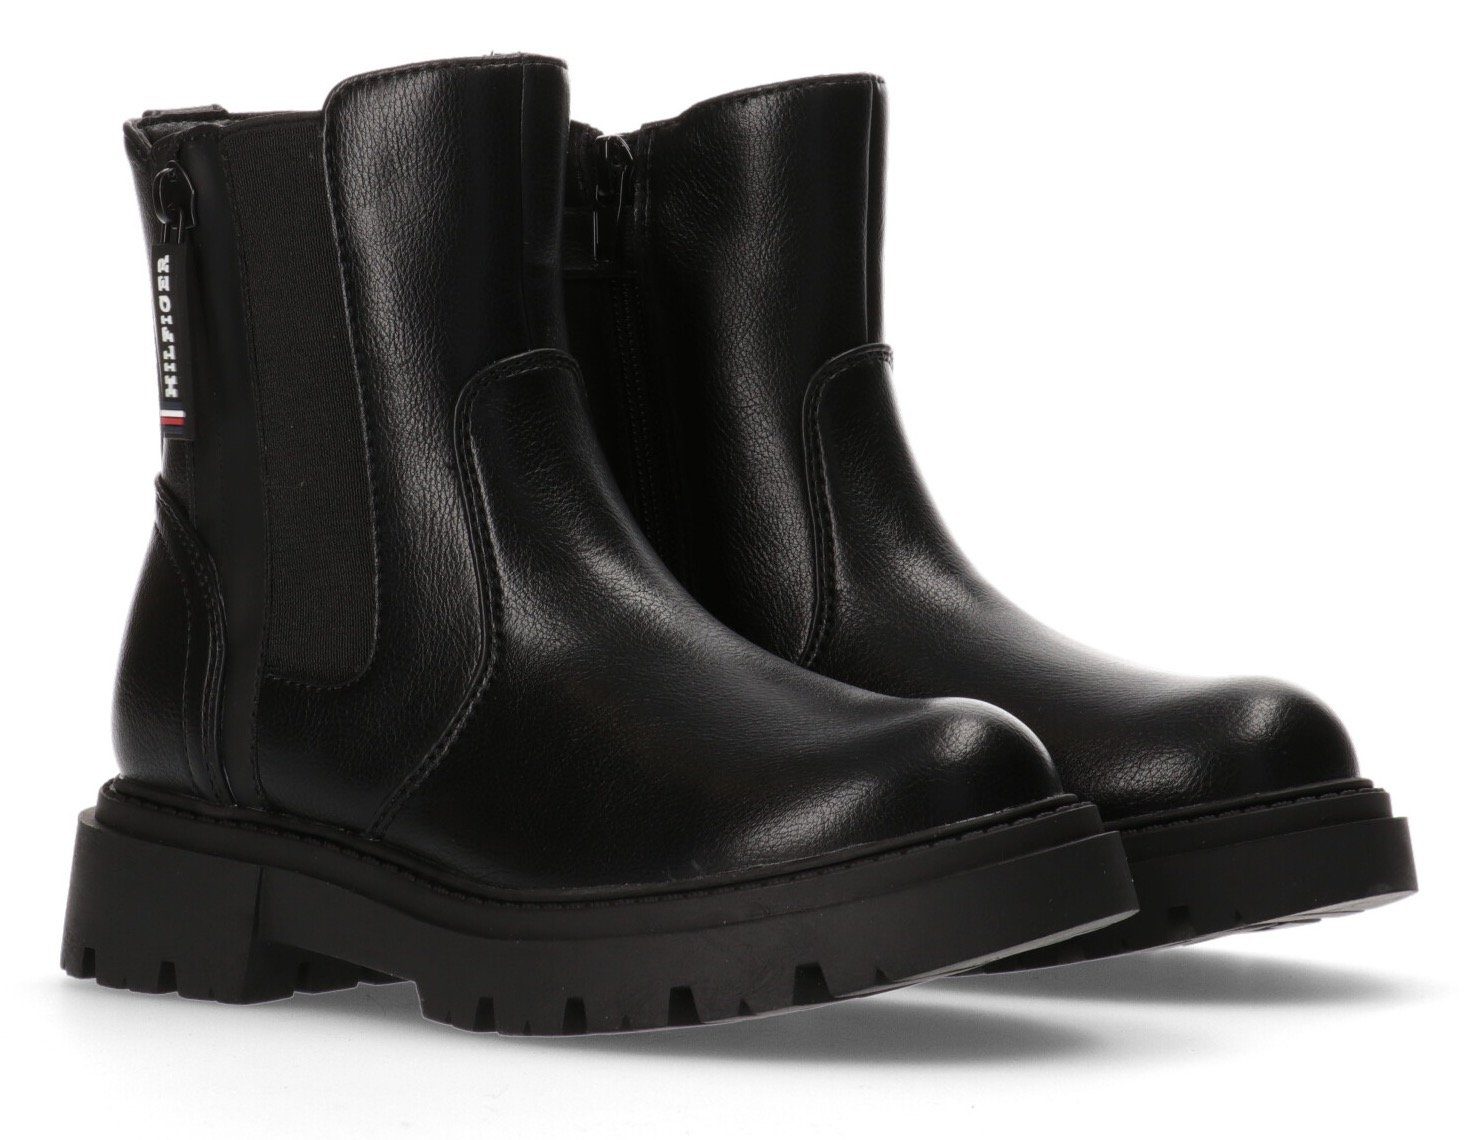 BOOT mit Plateausohle CHELSEA Hilfiger Tommy modischer Chelseaboots